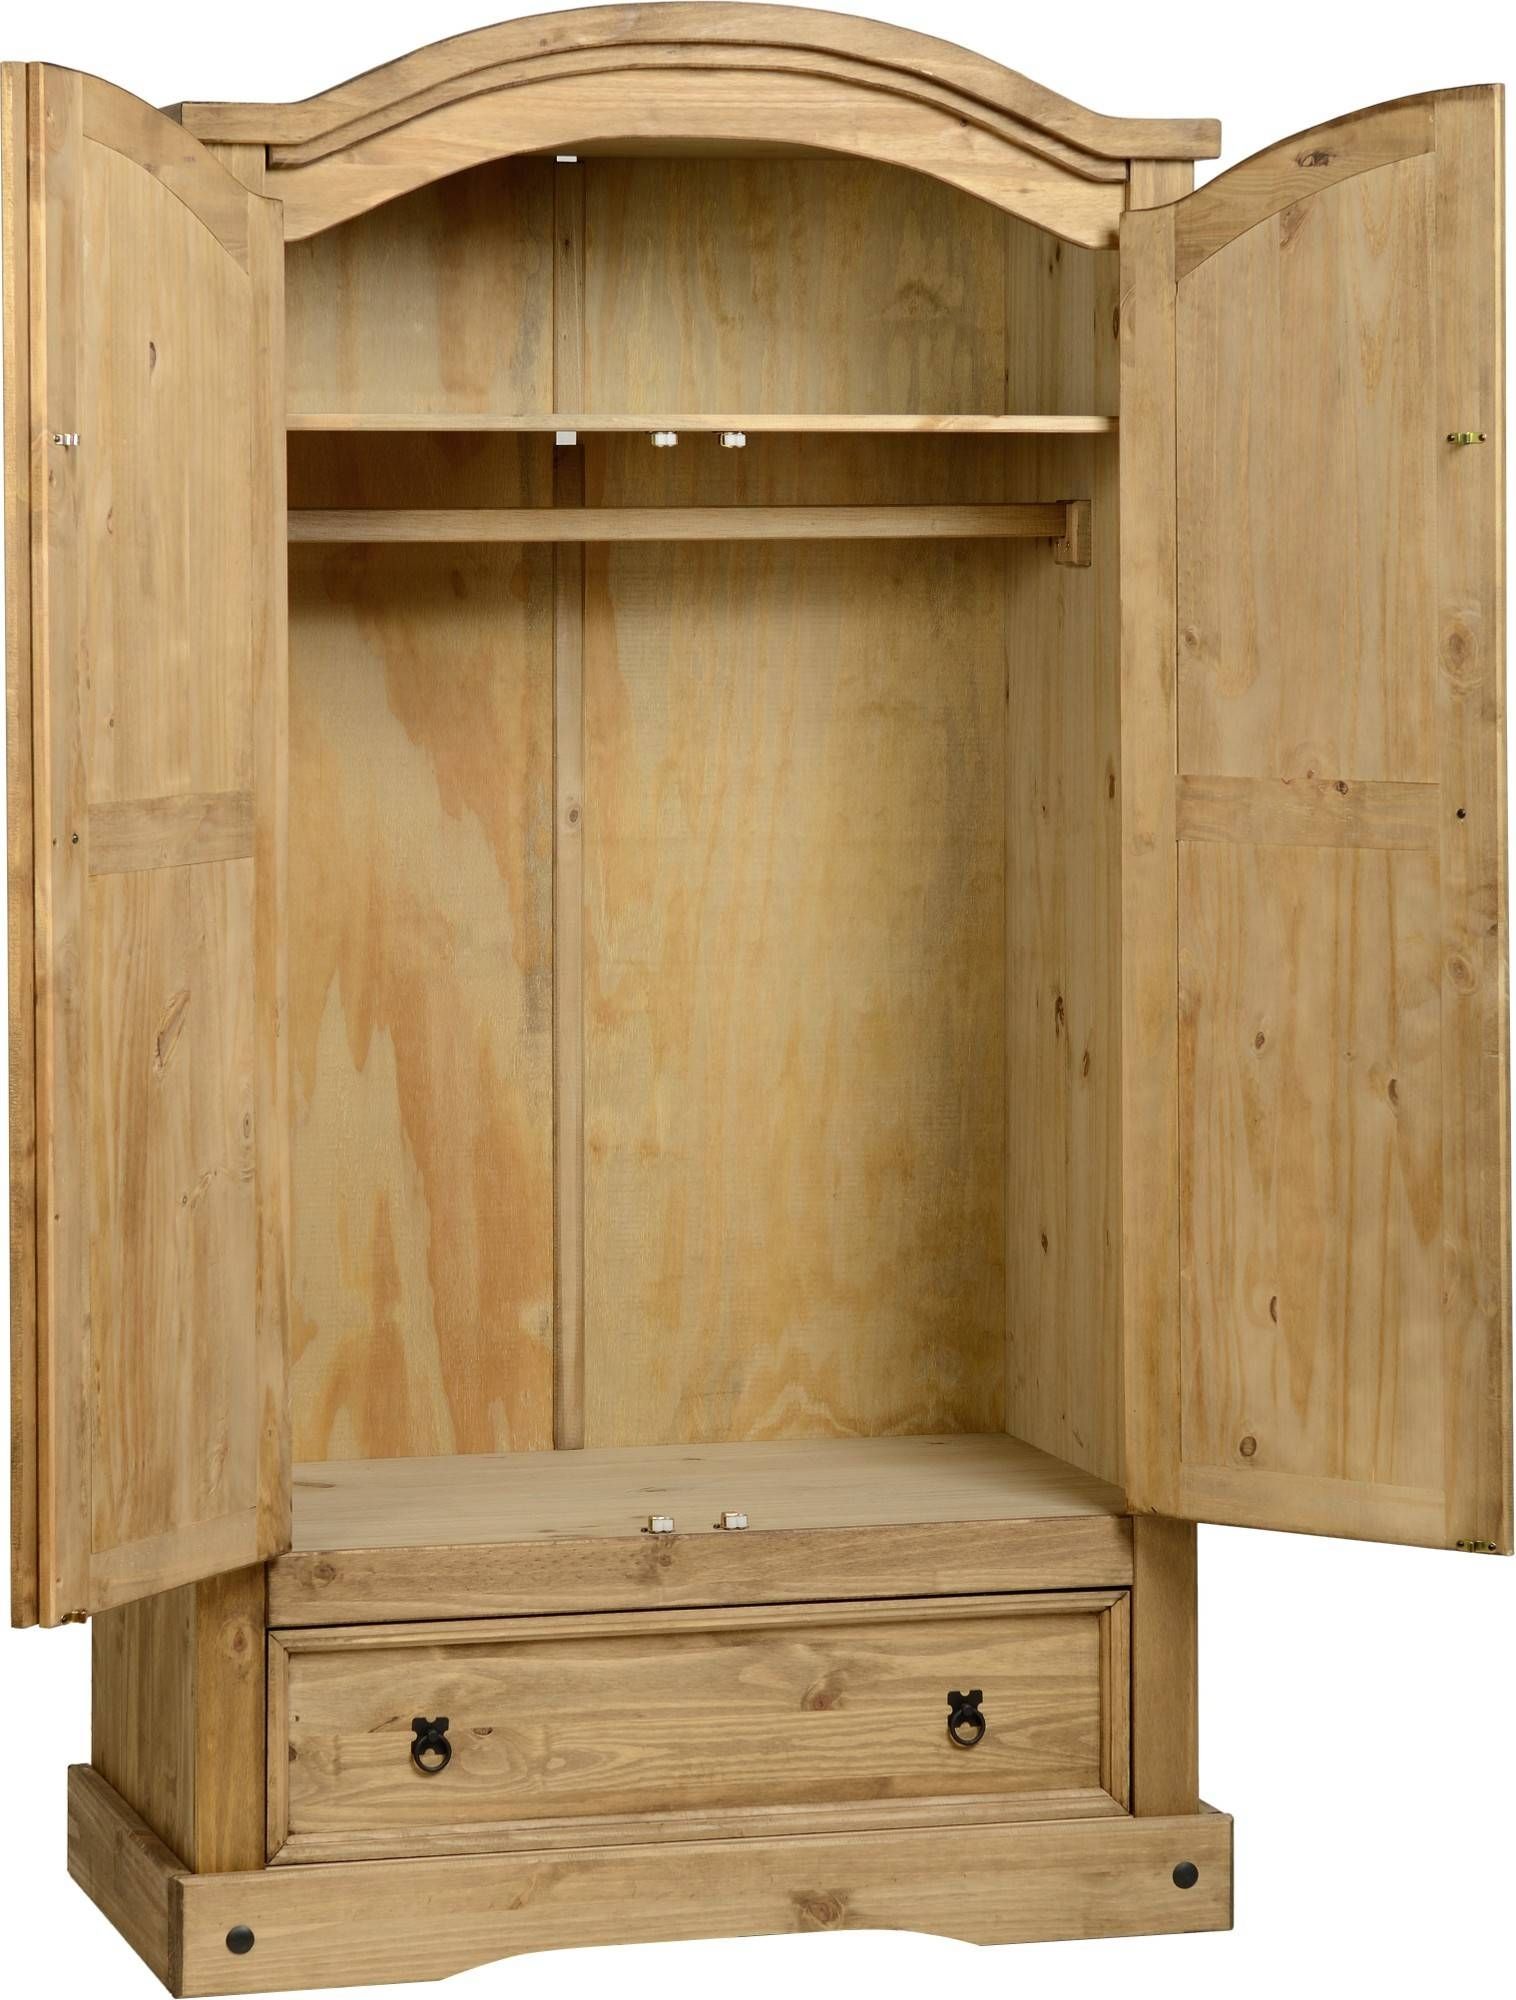 Corona Pine 2 Door Wardrobe With Drawer – Default Store View Throughout Pine Wardrobes With Drawers (View 4 of 15)